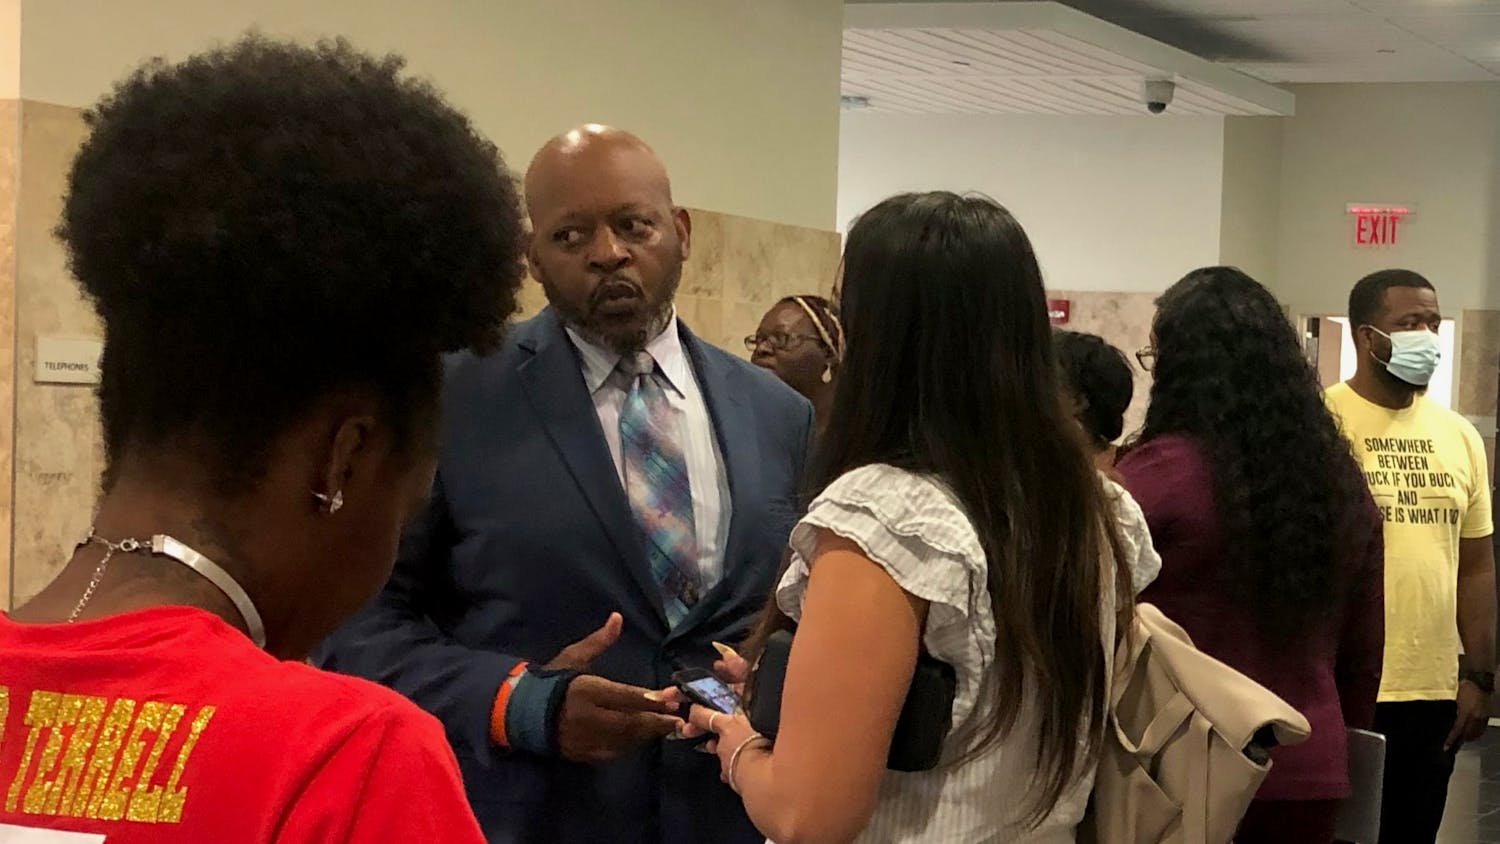 Terrell Bradley’s father Victor Bradley speaks with local activist Danielle Chanzes as they both await Judge Walter Green’s decision outside of the Alachua County Stephen P. Mickle Criminal courtroom Tuesday, July 19, 2022.